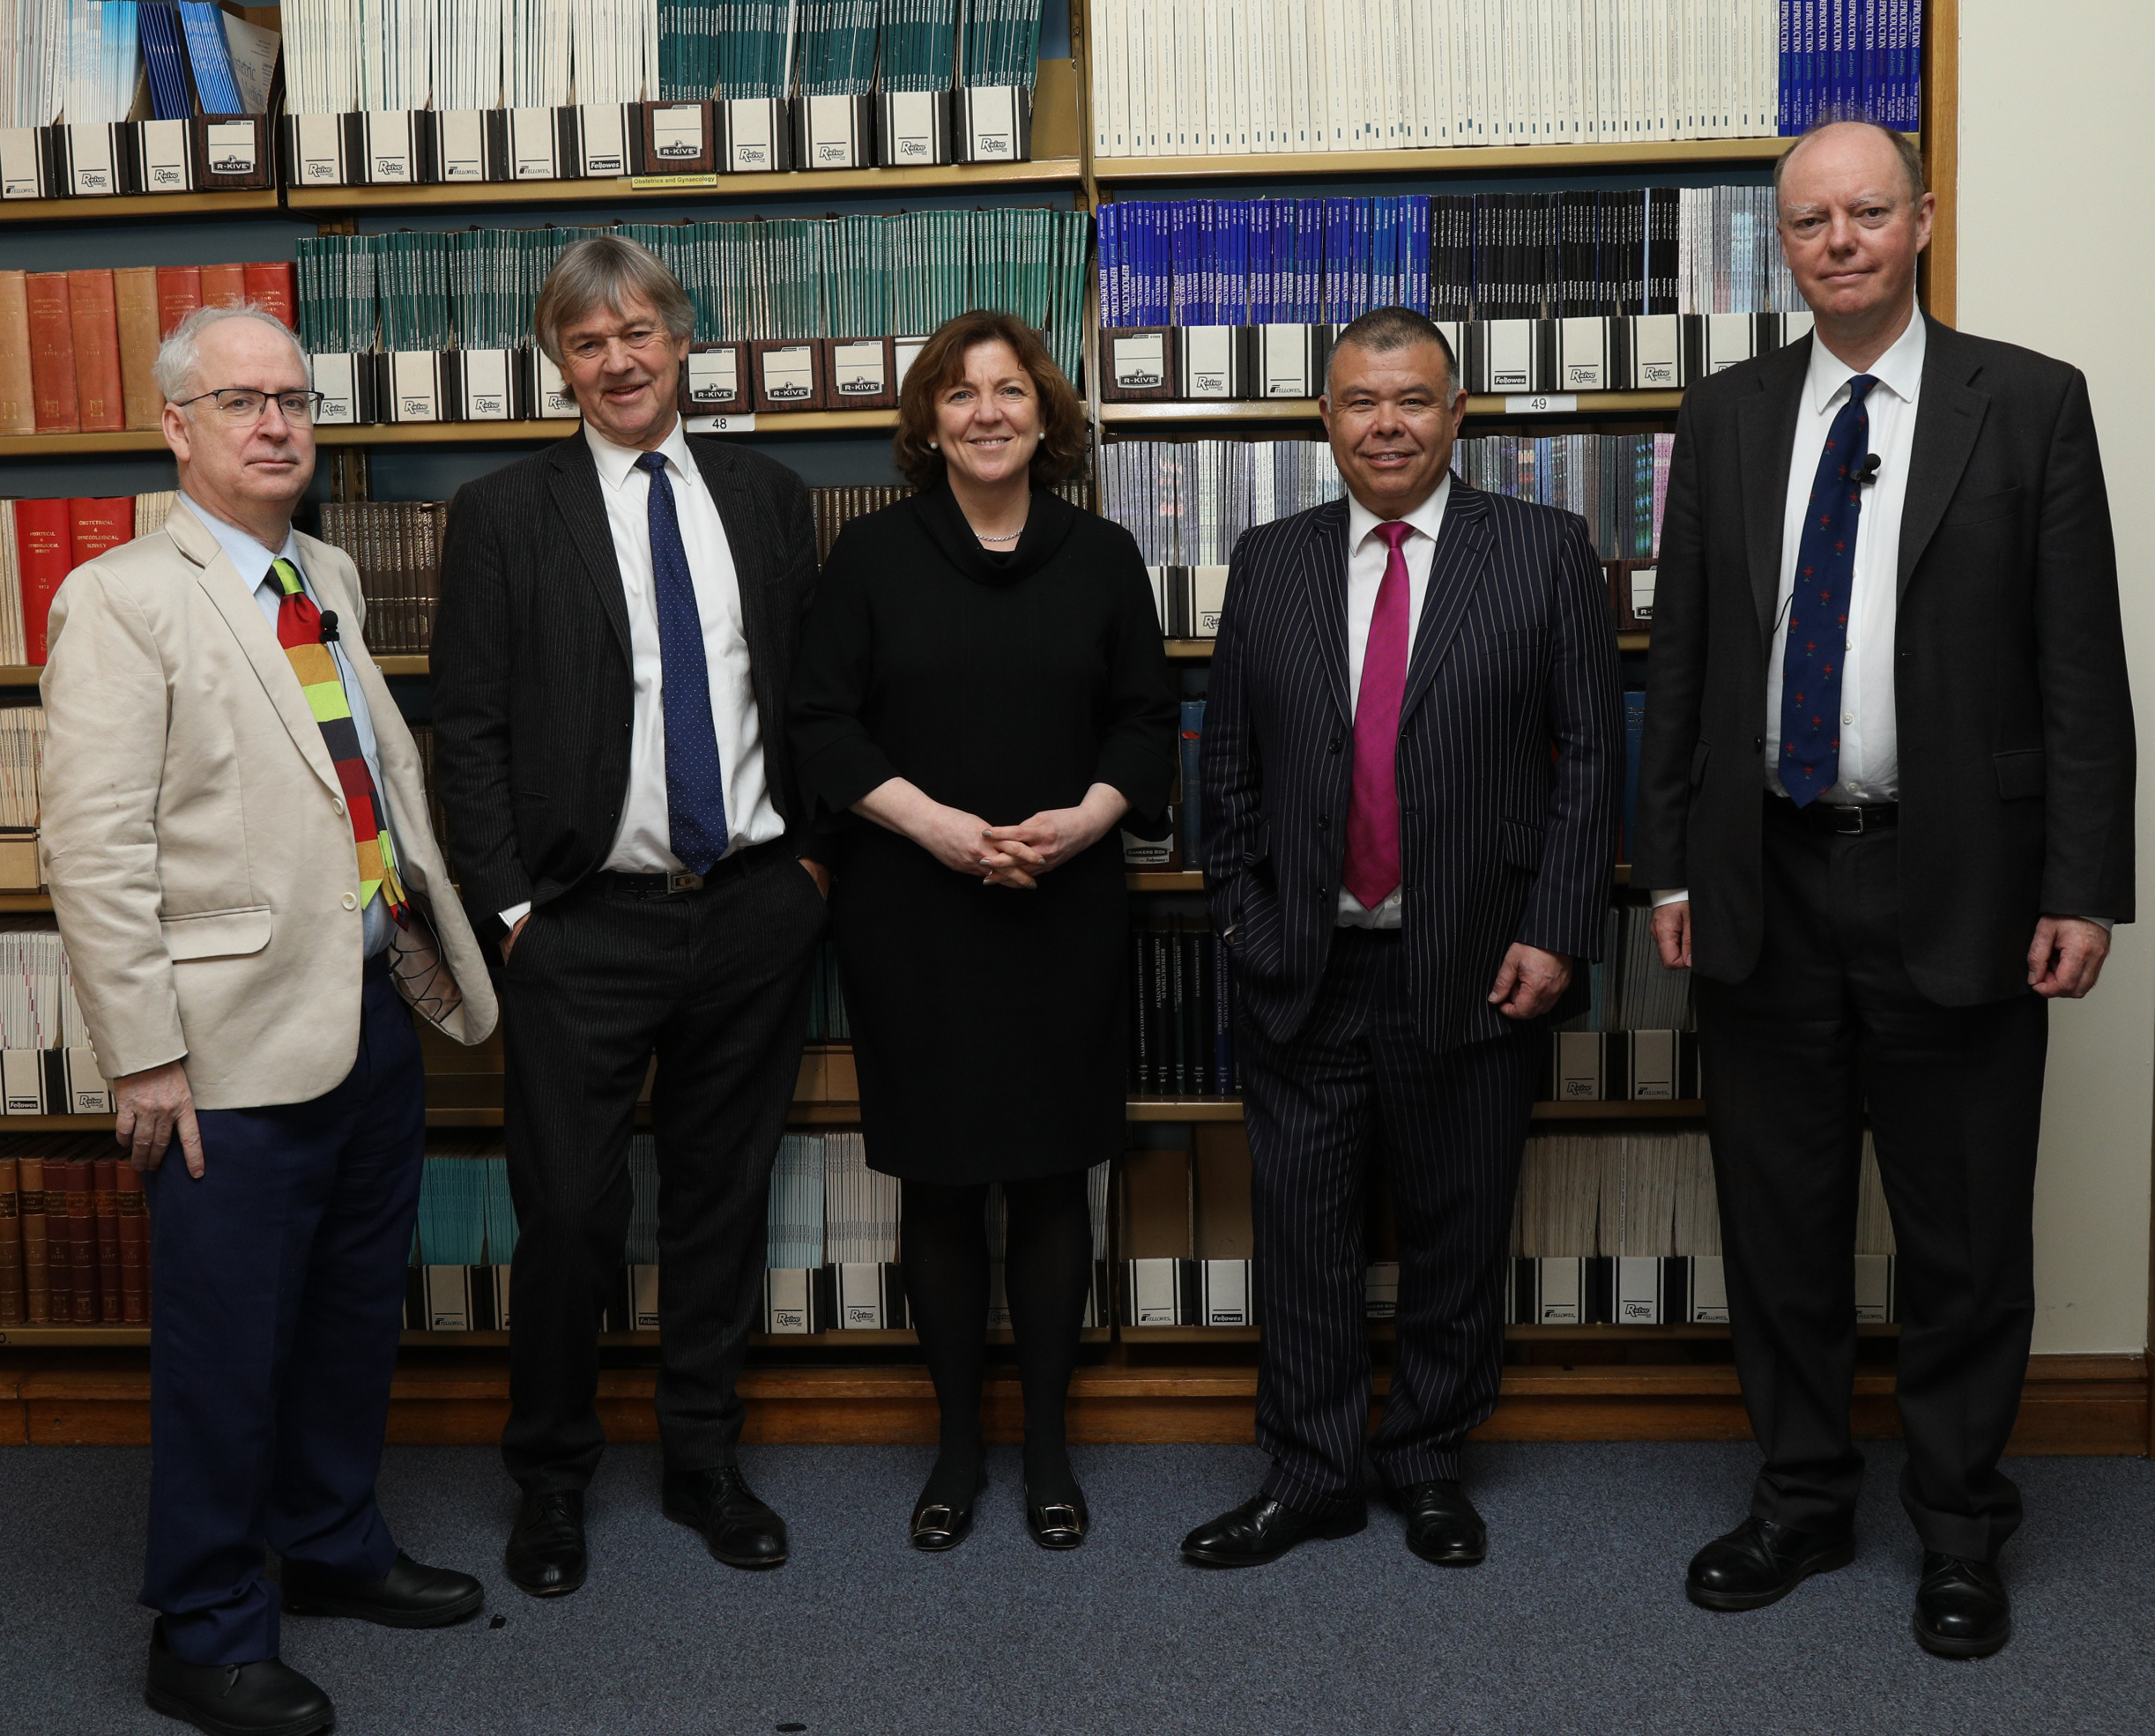 From left to right Professor Sir Simon Wessely, RSM President Professor Roger Kirby, RSM Chief executive Michele Acton, Professor Sir Jonathan Van-Tam and Professor Sir Chris Whitty